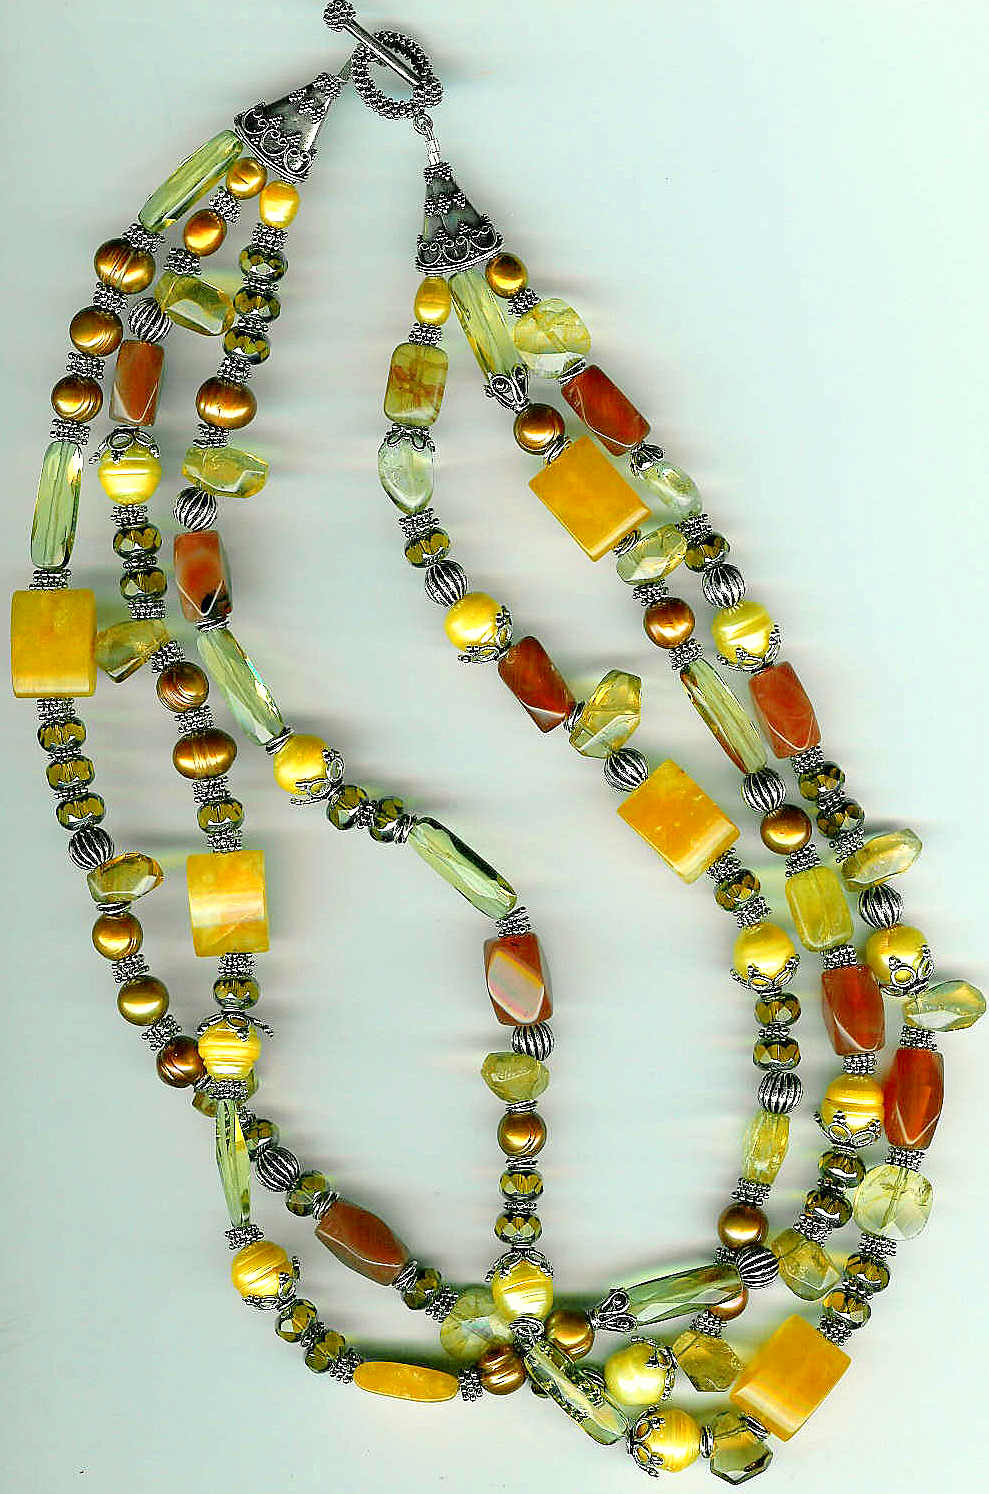 4. Yellow Jade, Carnelian, Citrine, Freshwater Pearls, Crystals and Bali Sterling Silver